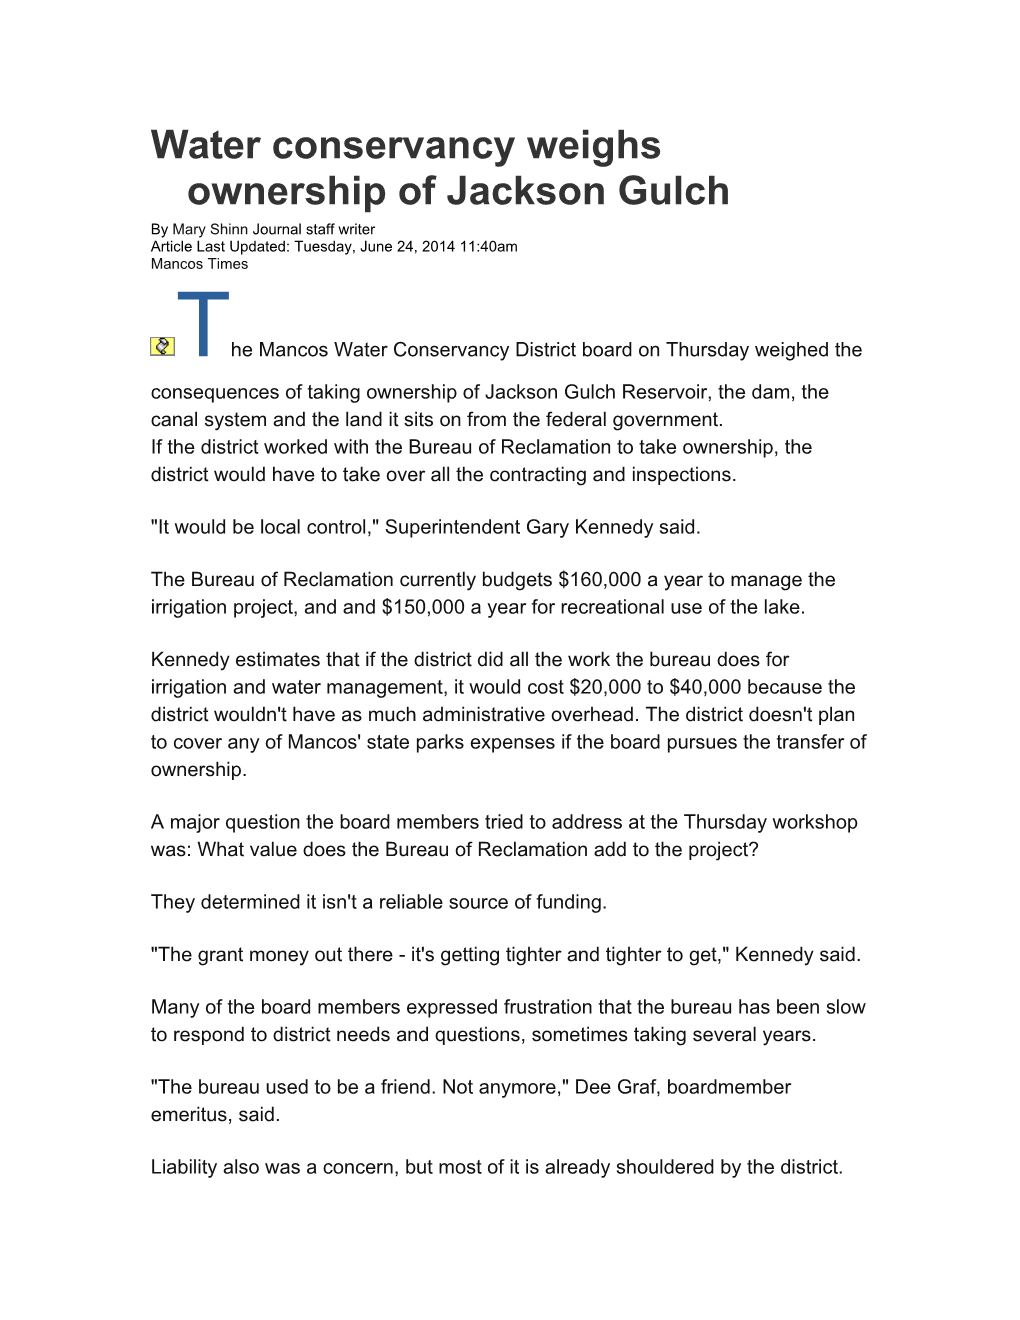 Water Conservancy Weighs Ownership of Jackson Gulch